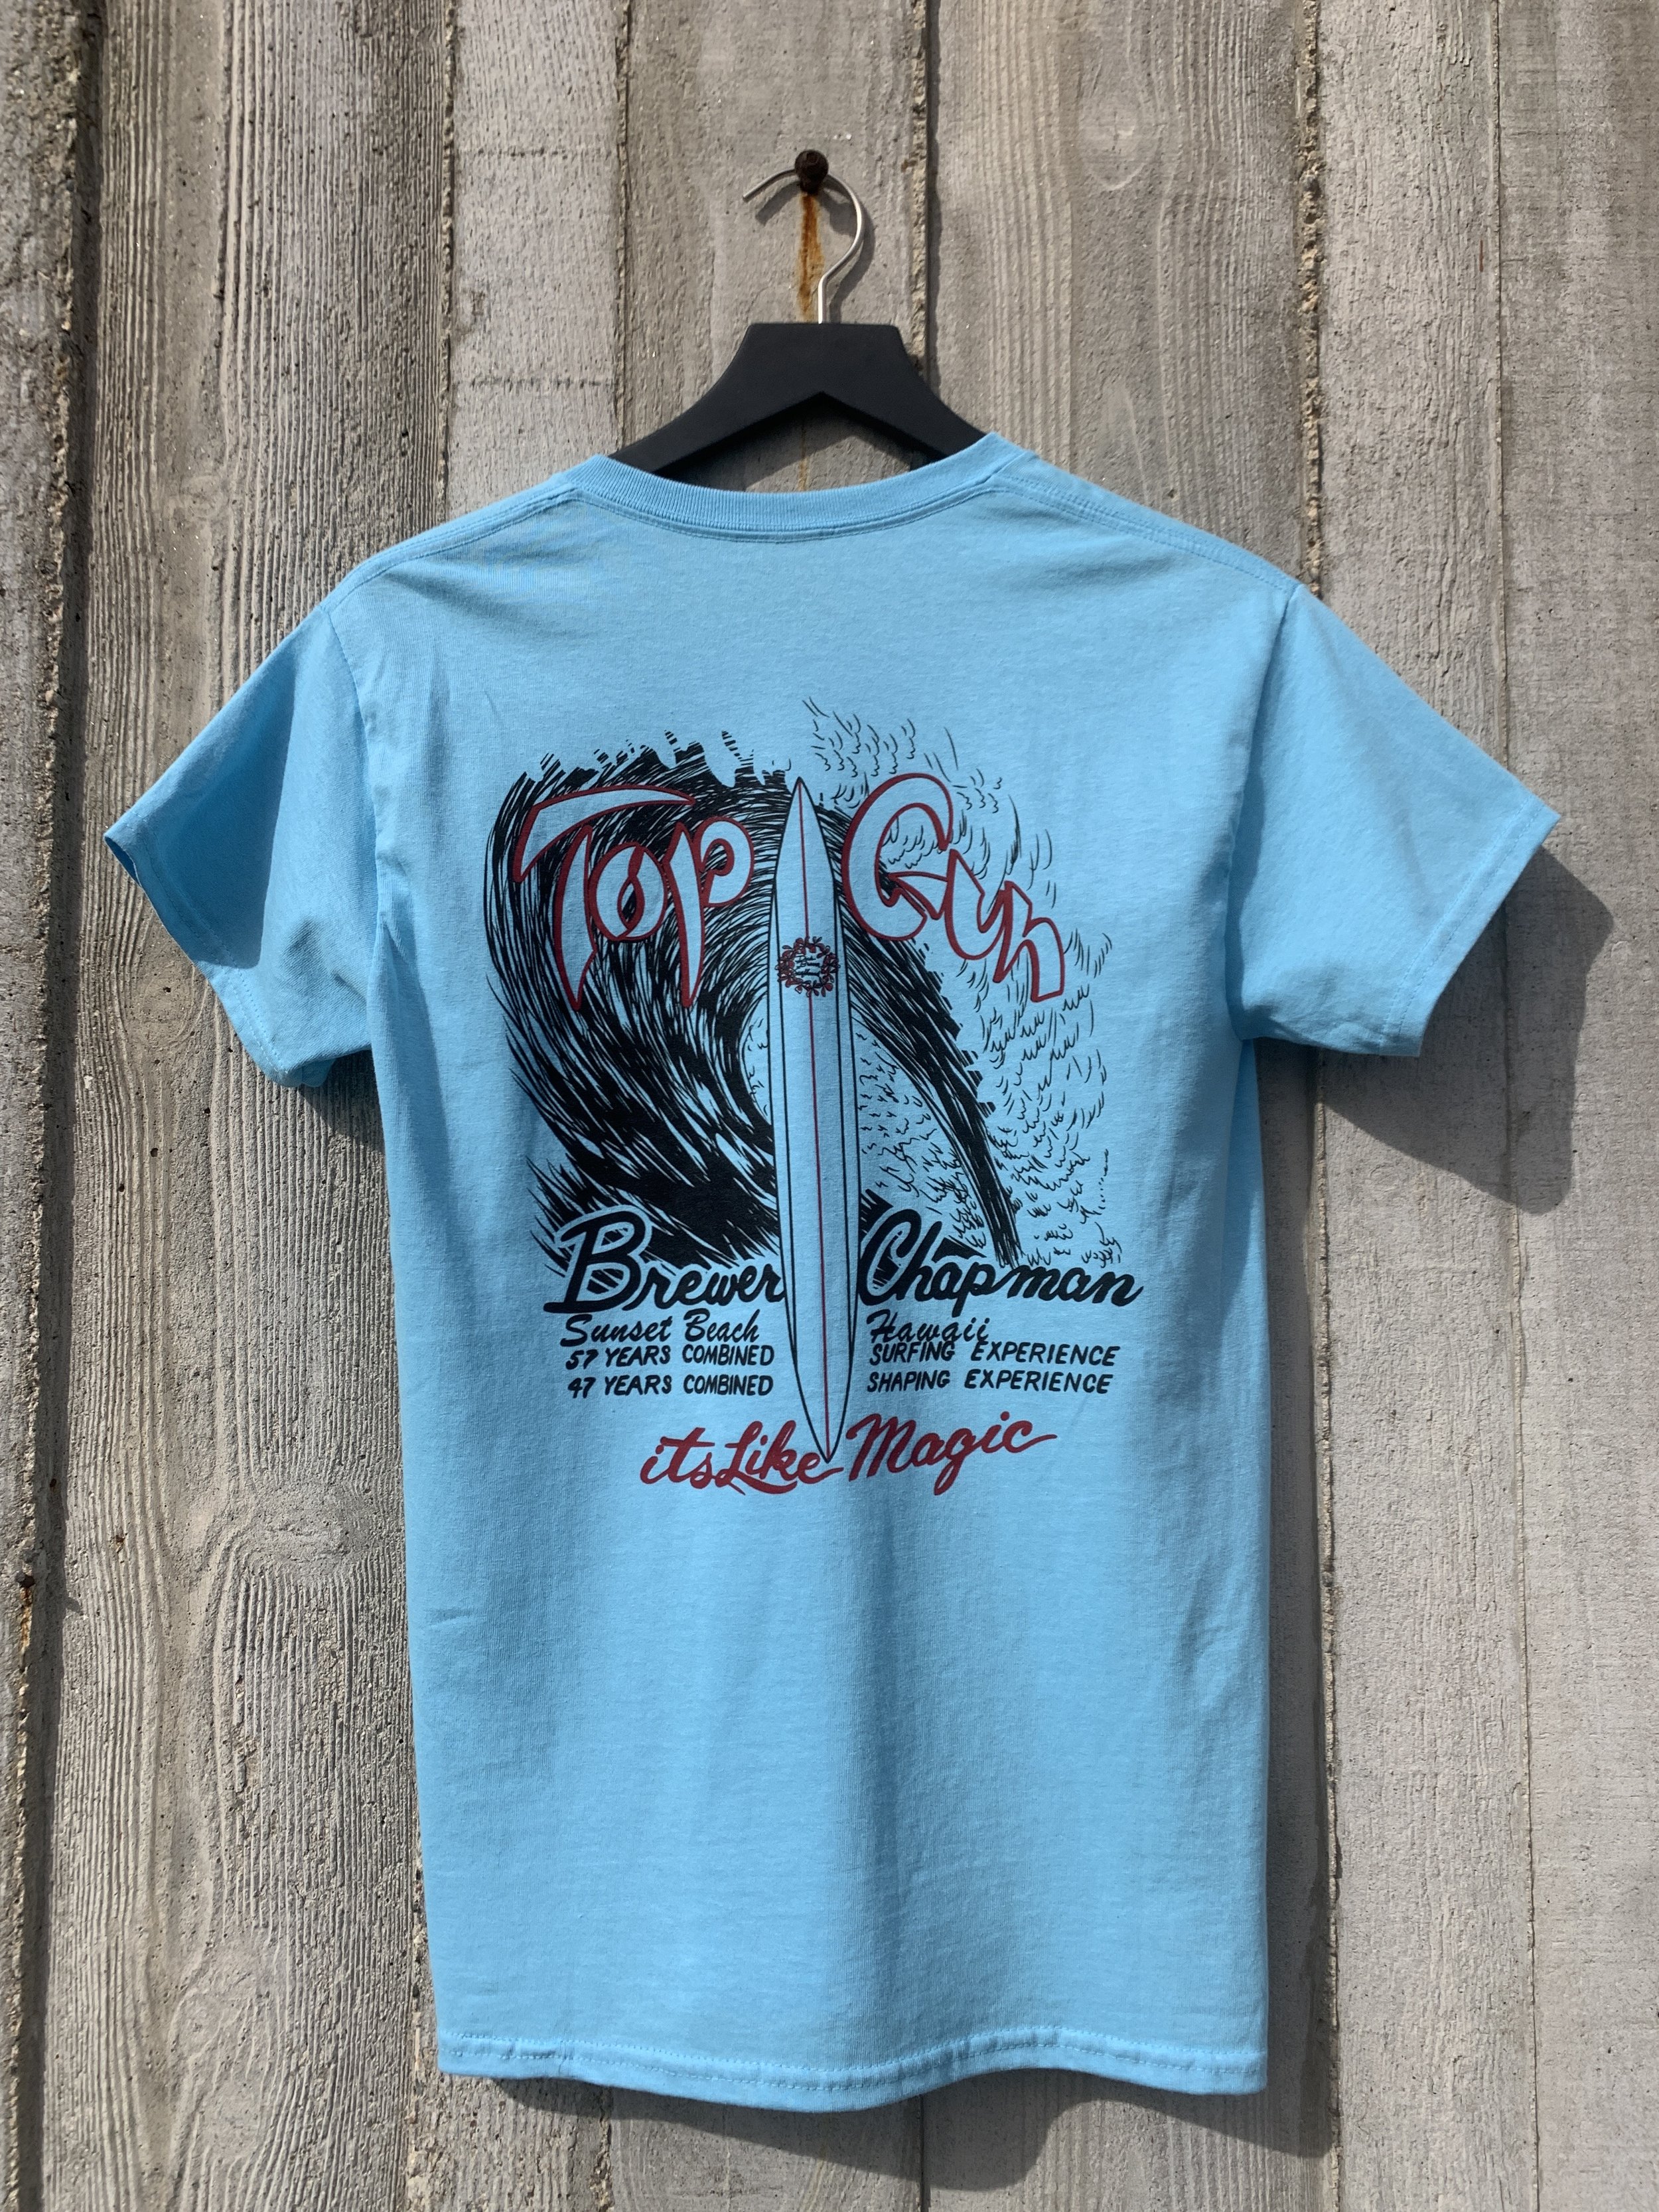 ⬆️ GET TO THE TOP! ⬆️ [NEW SHOP!]